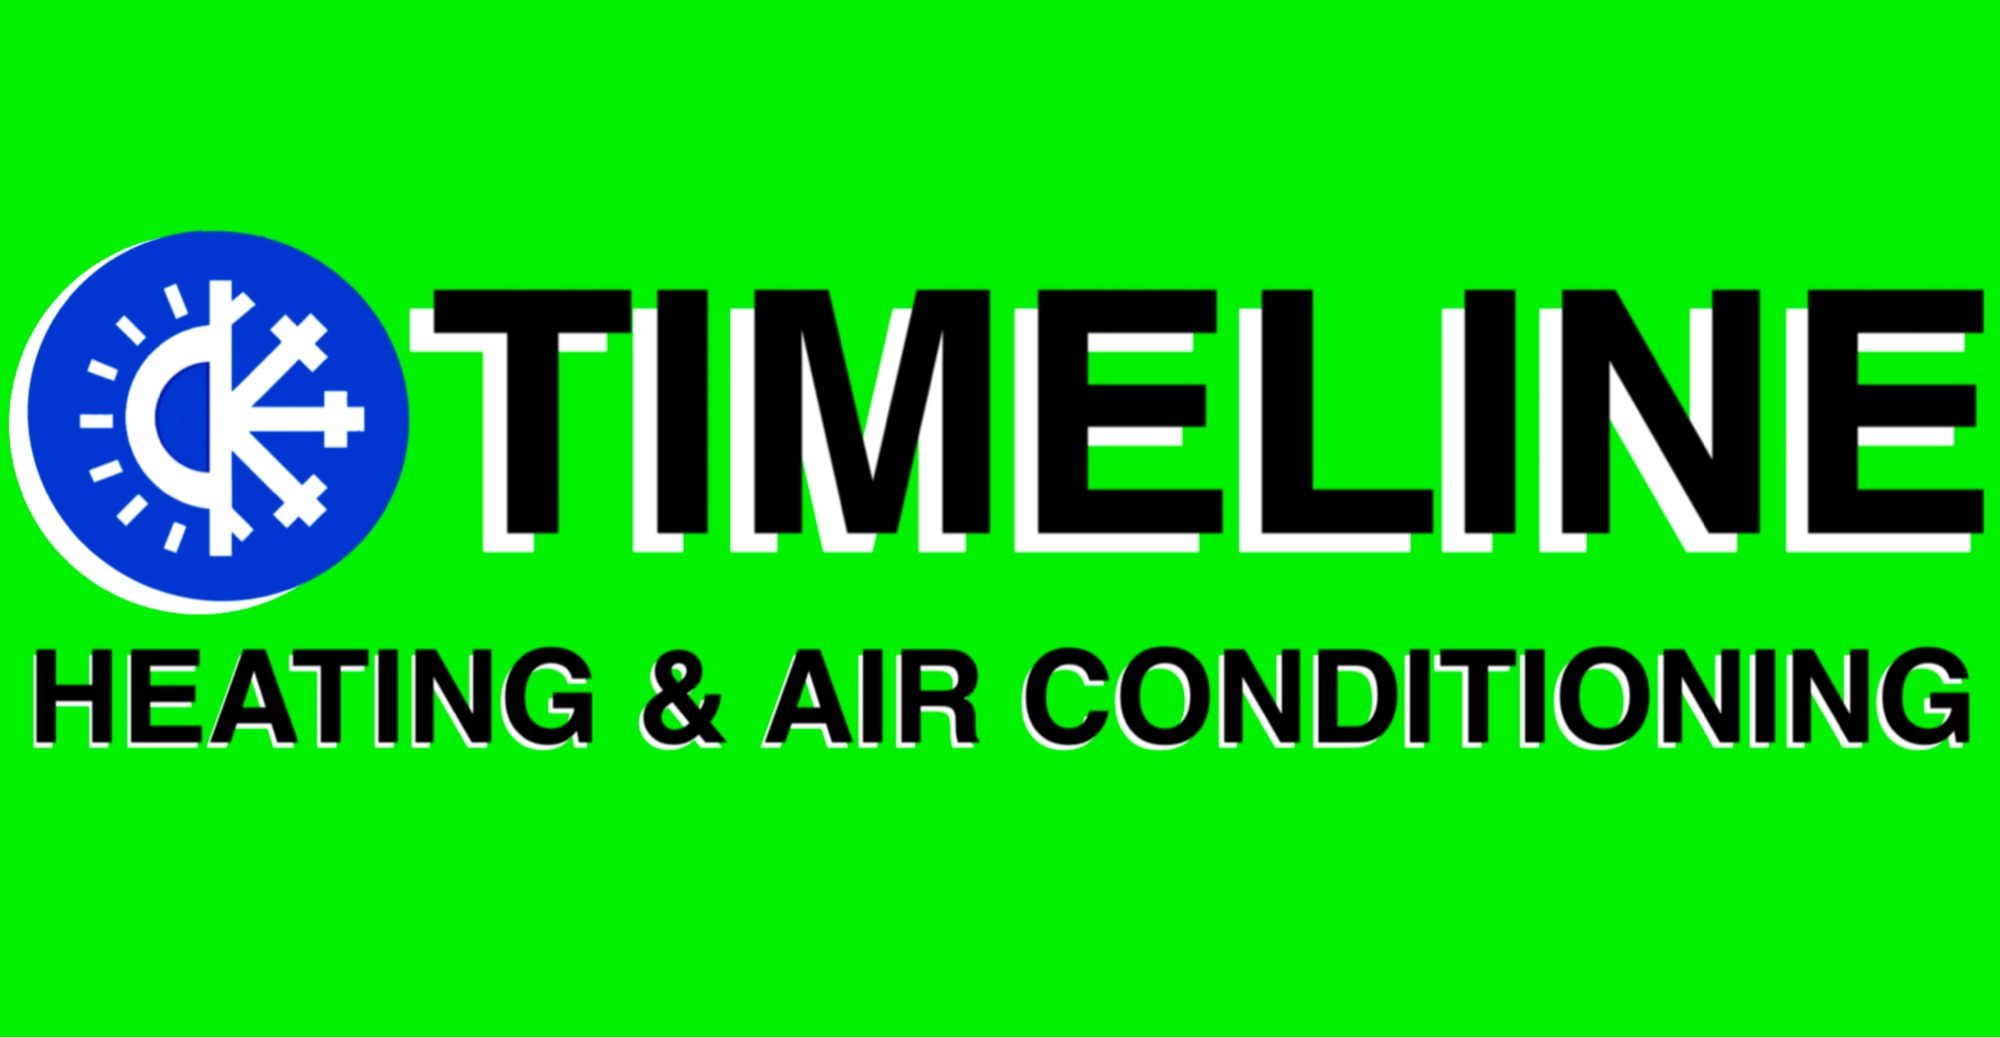 Timeline Heating & Air Conditioning Logo